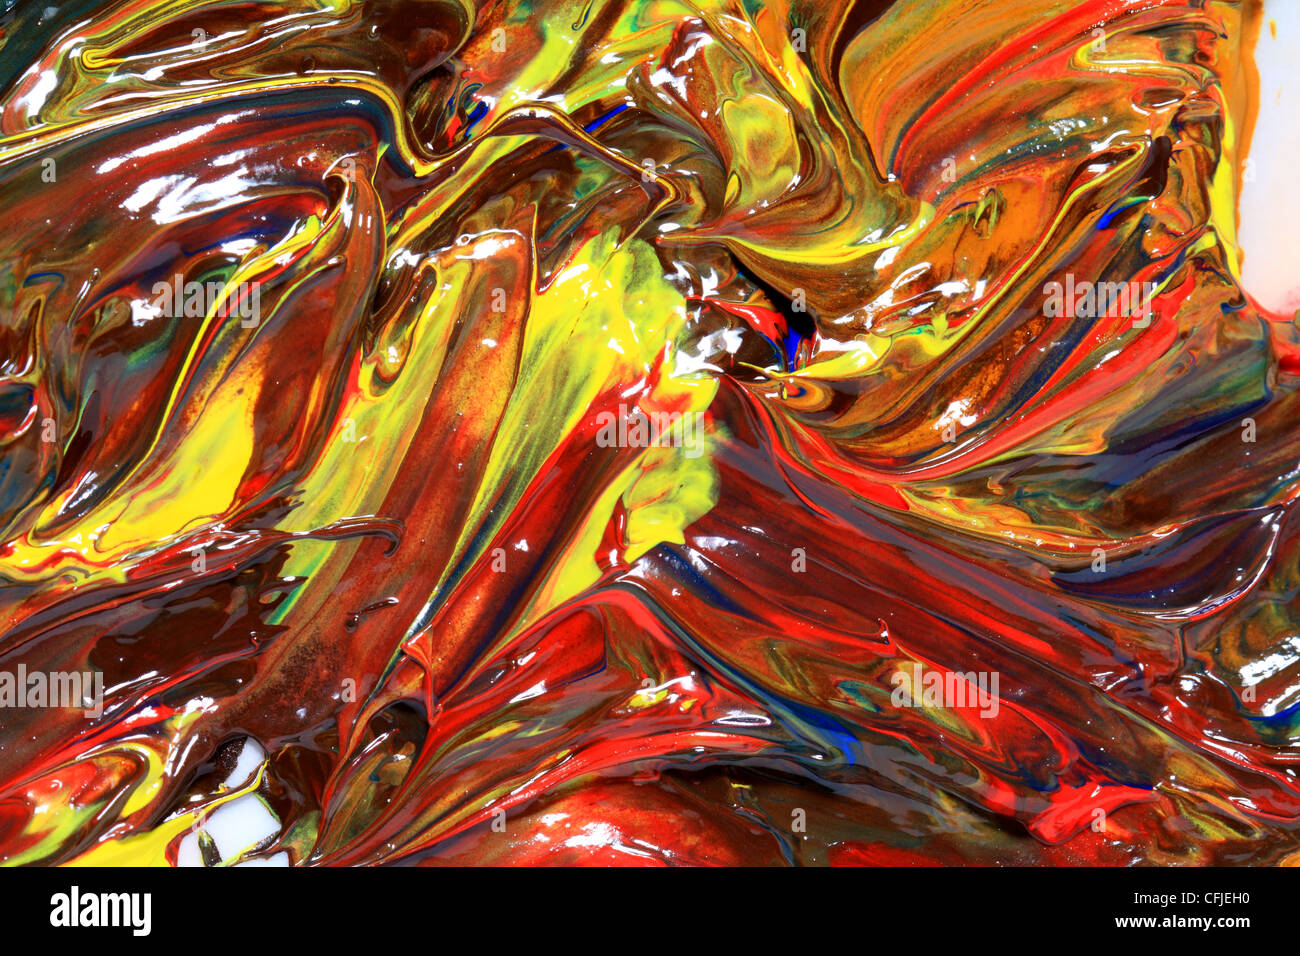 Object oil painting supplies hi-res stock photography and images - Alamy